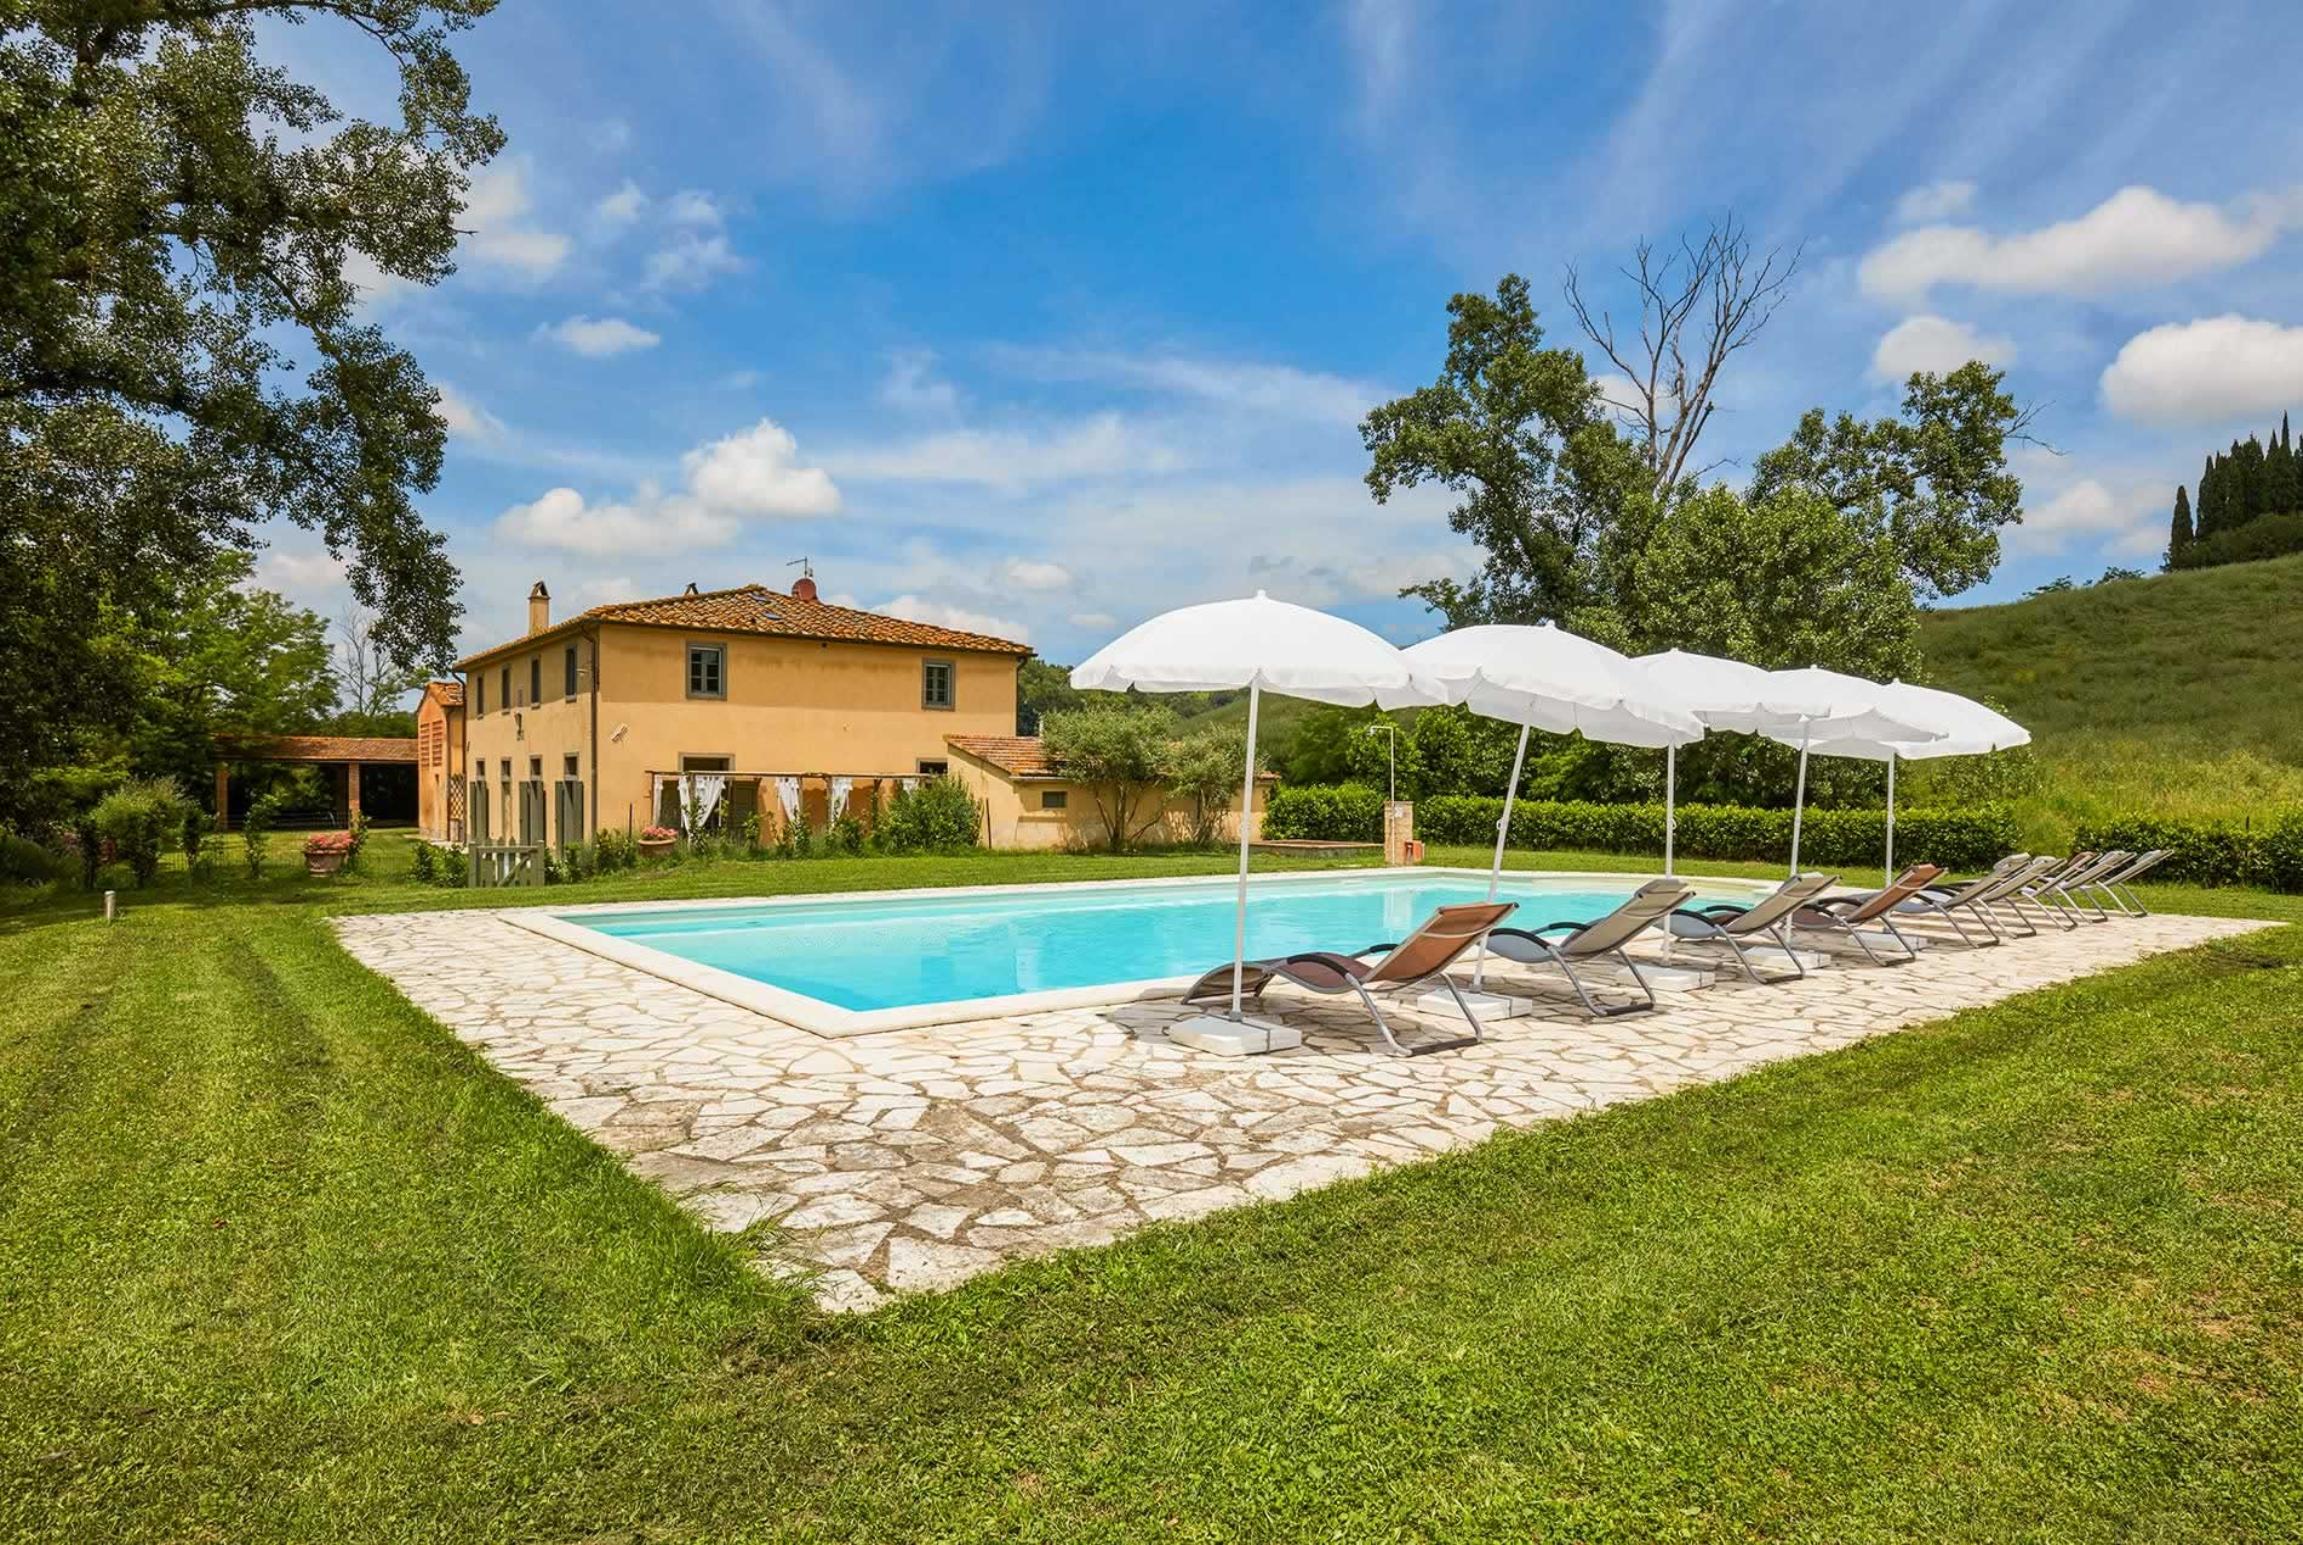 Property Image 1 - Rural 4 bedroom villa with pool, WIFI & BBQ